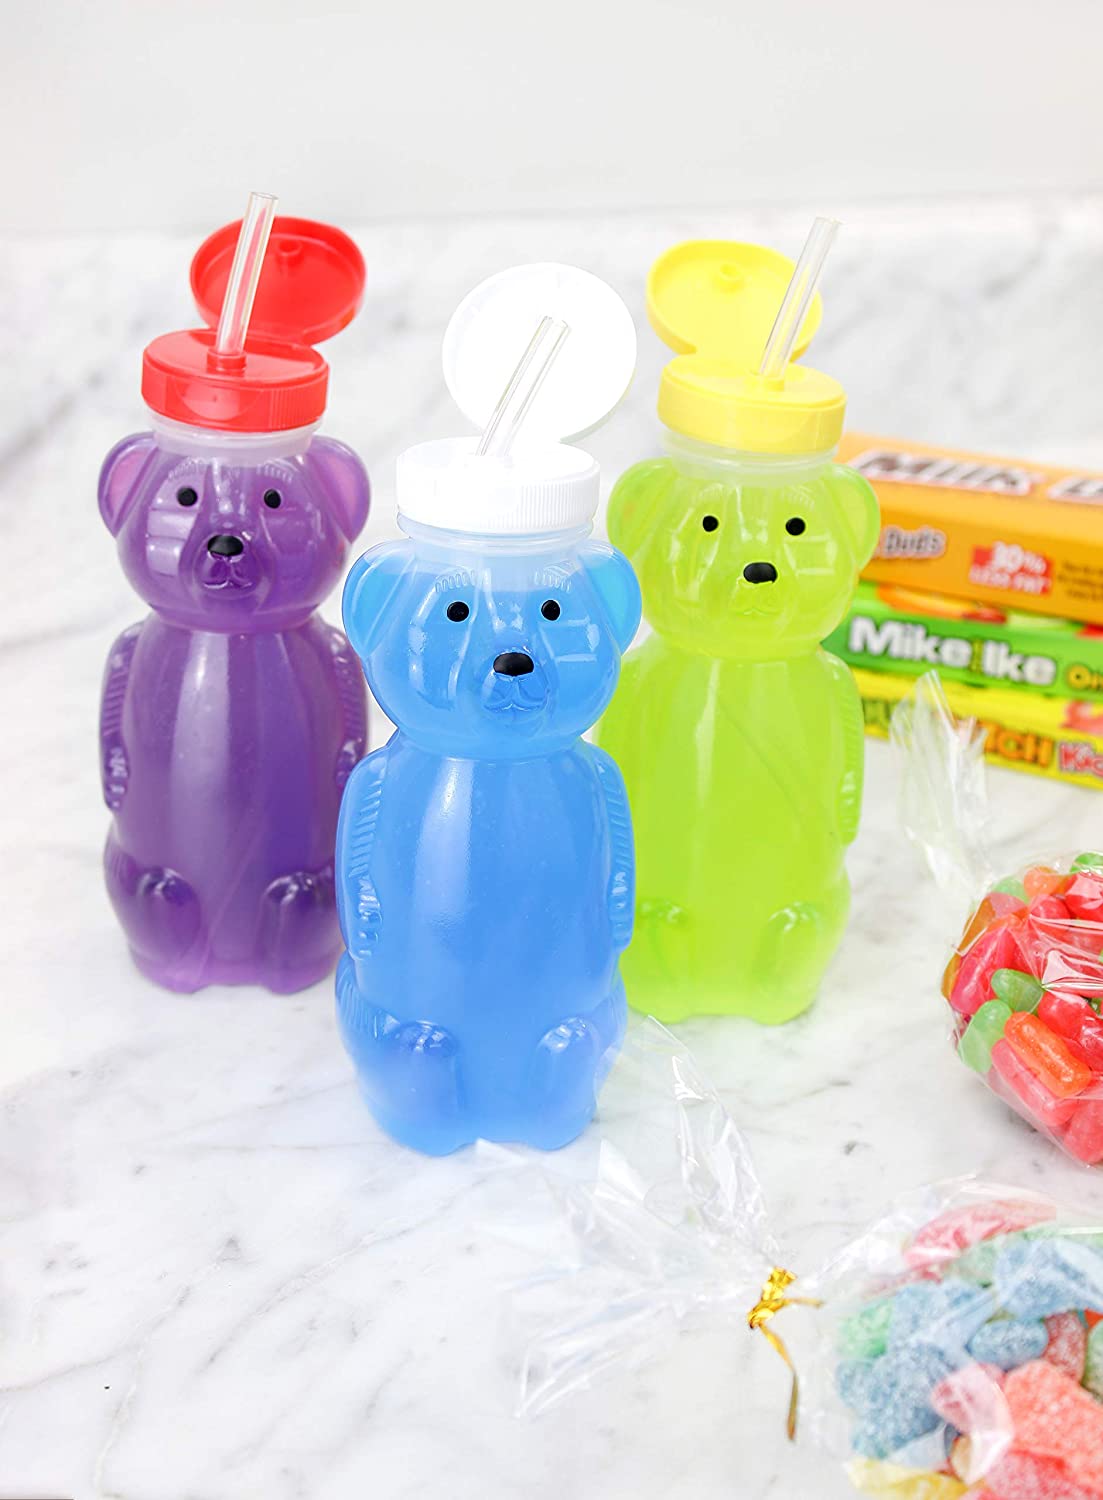 Honey Bear Straw Cups (3-Pack, Colored Lids) - CBKit026